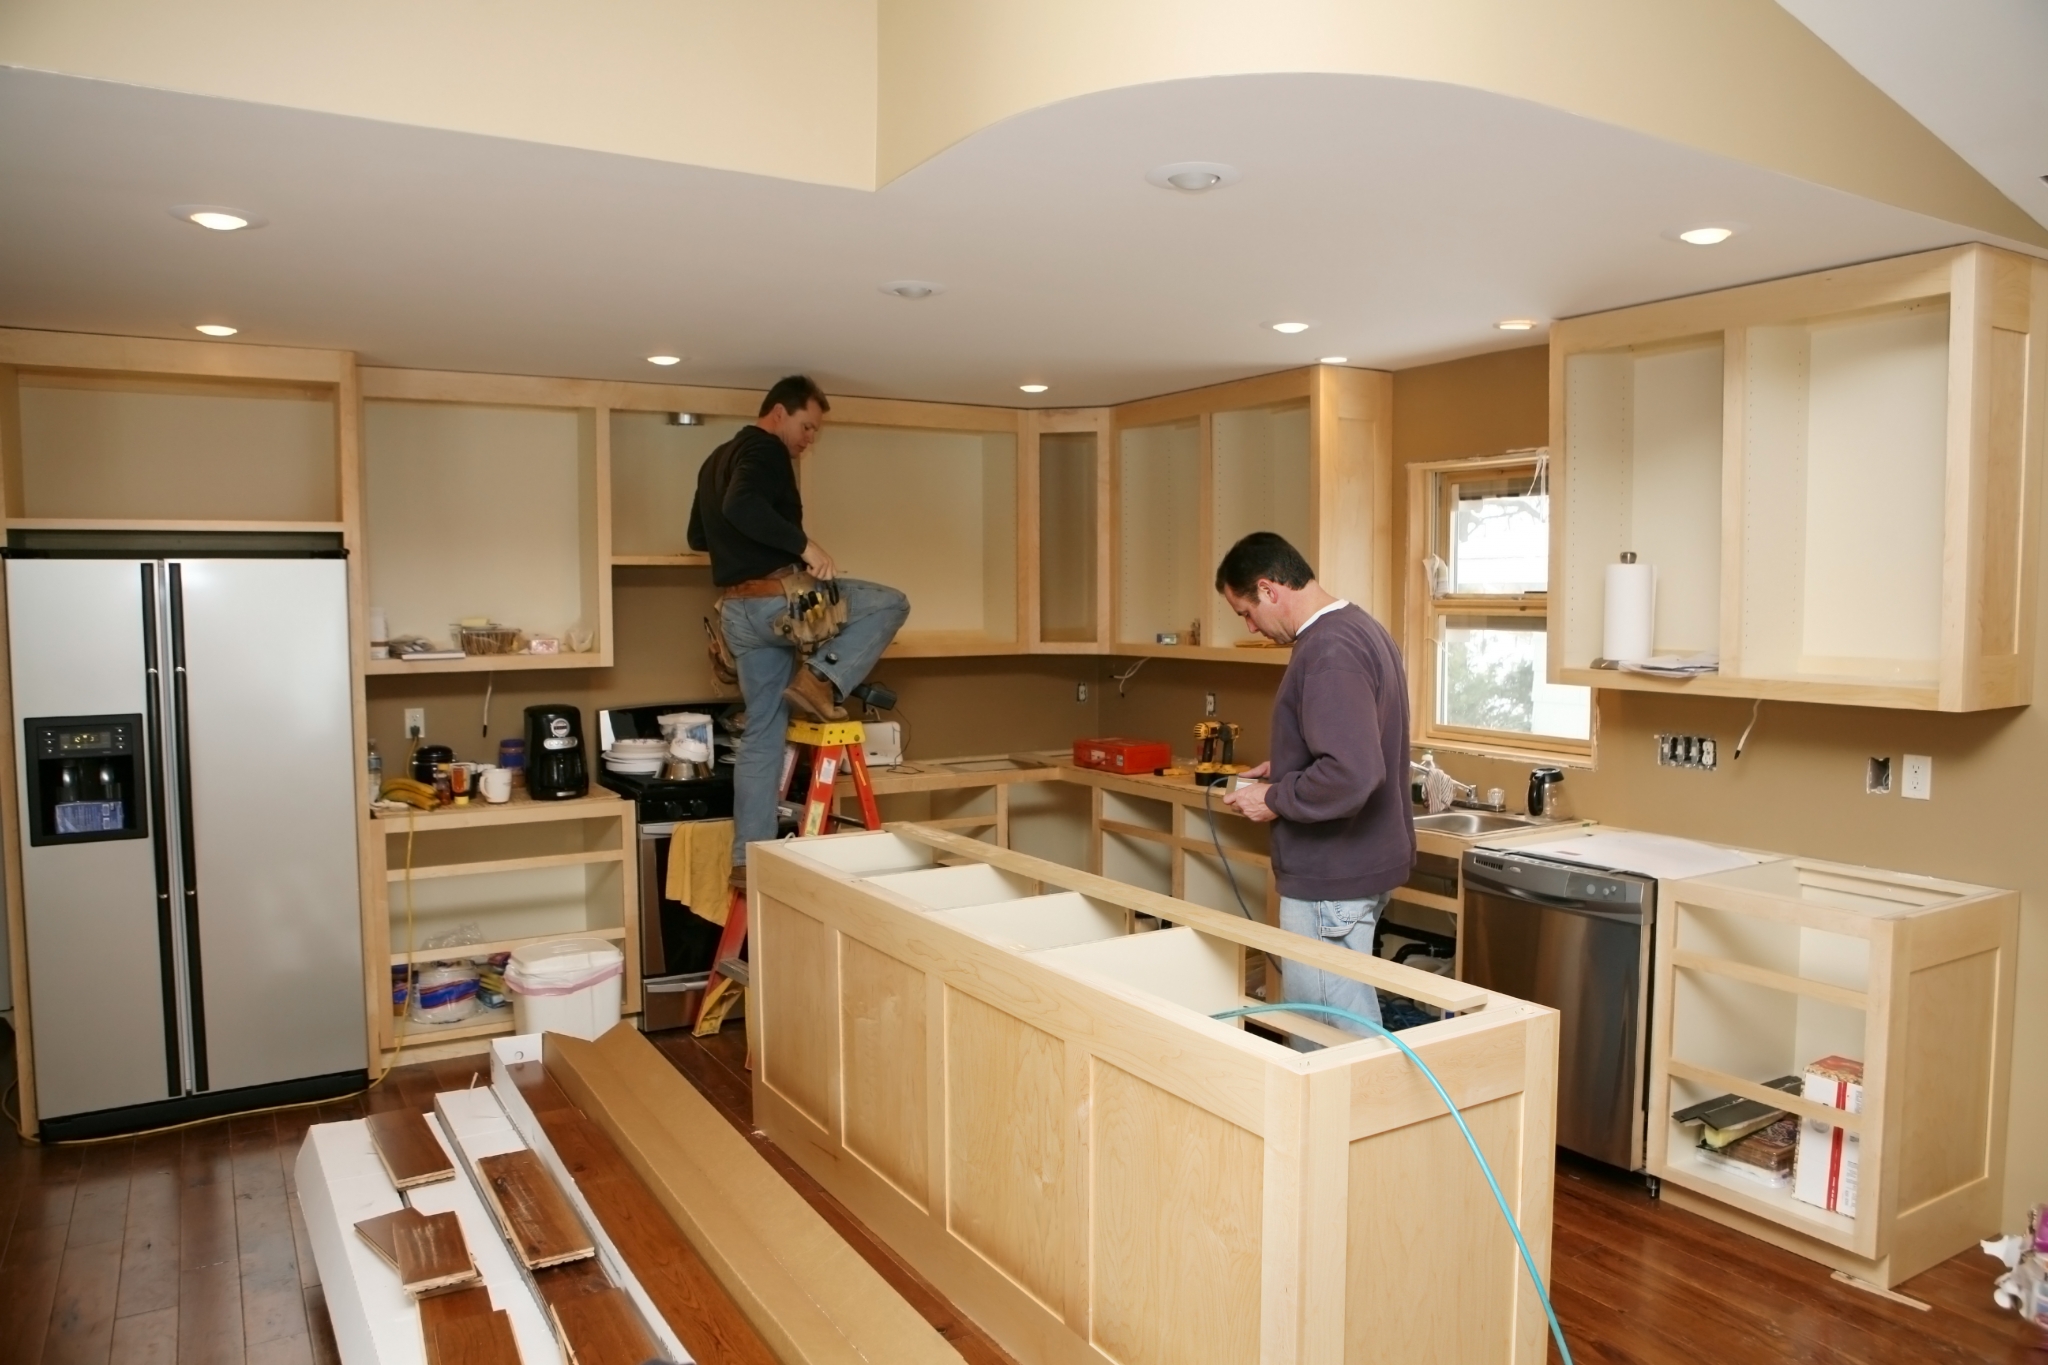 5 Must-Haves for Your Kitchen Island - Hawaii Home + Remodeling